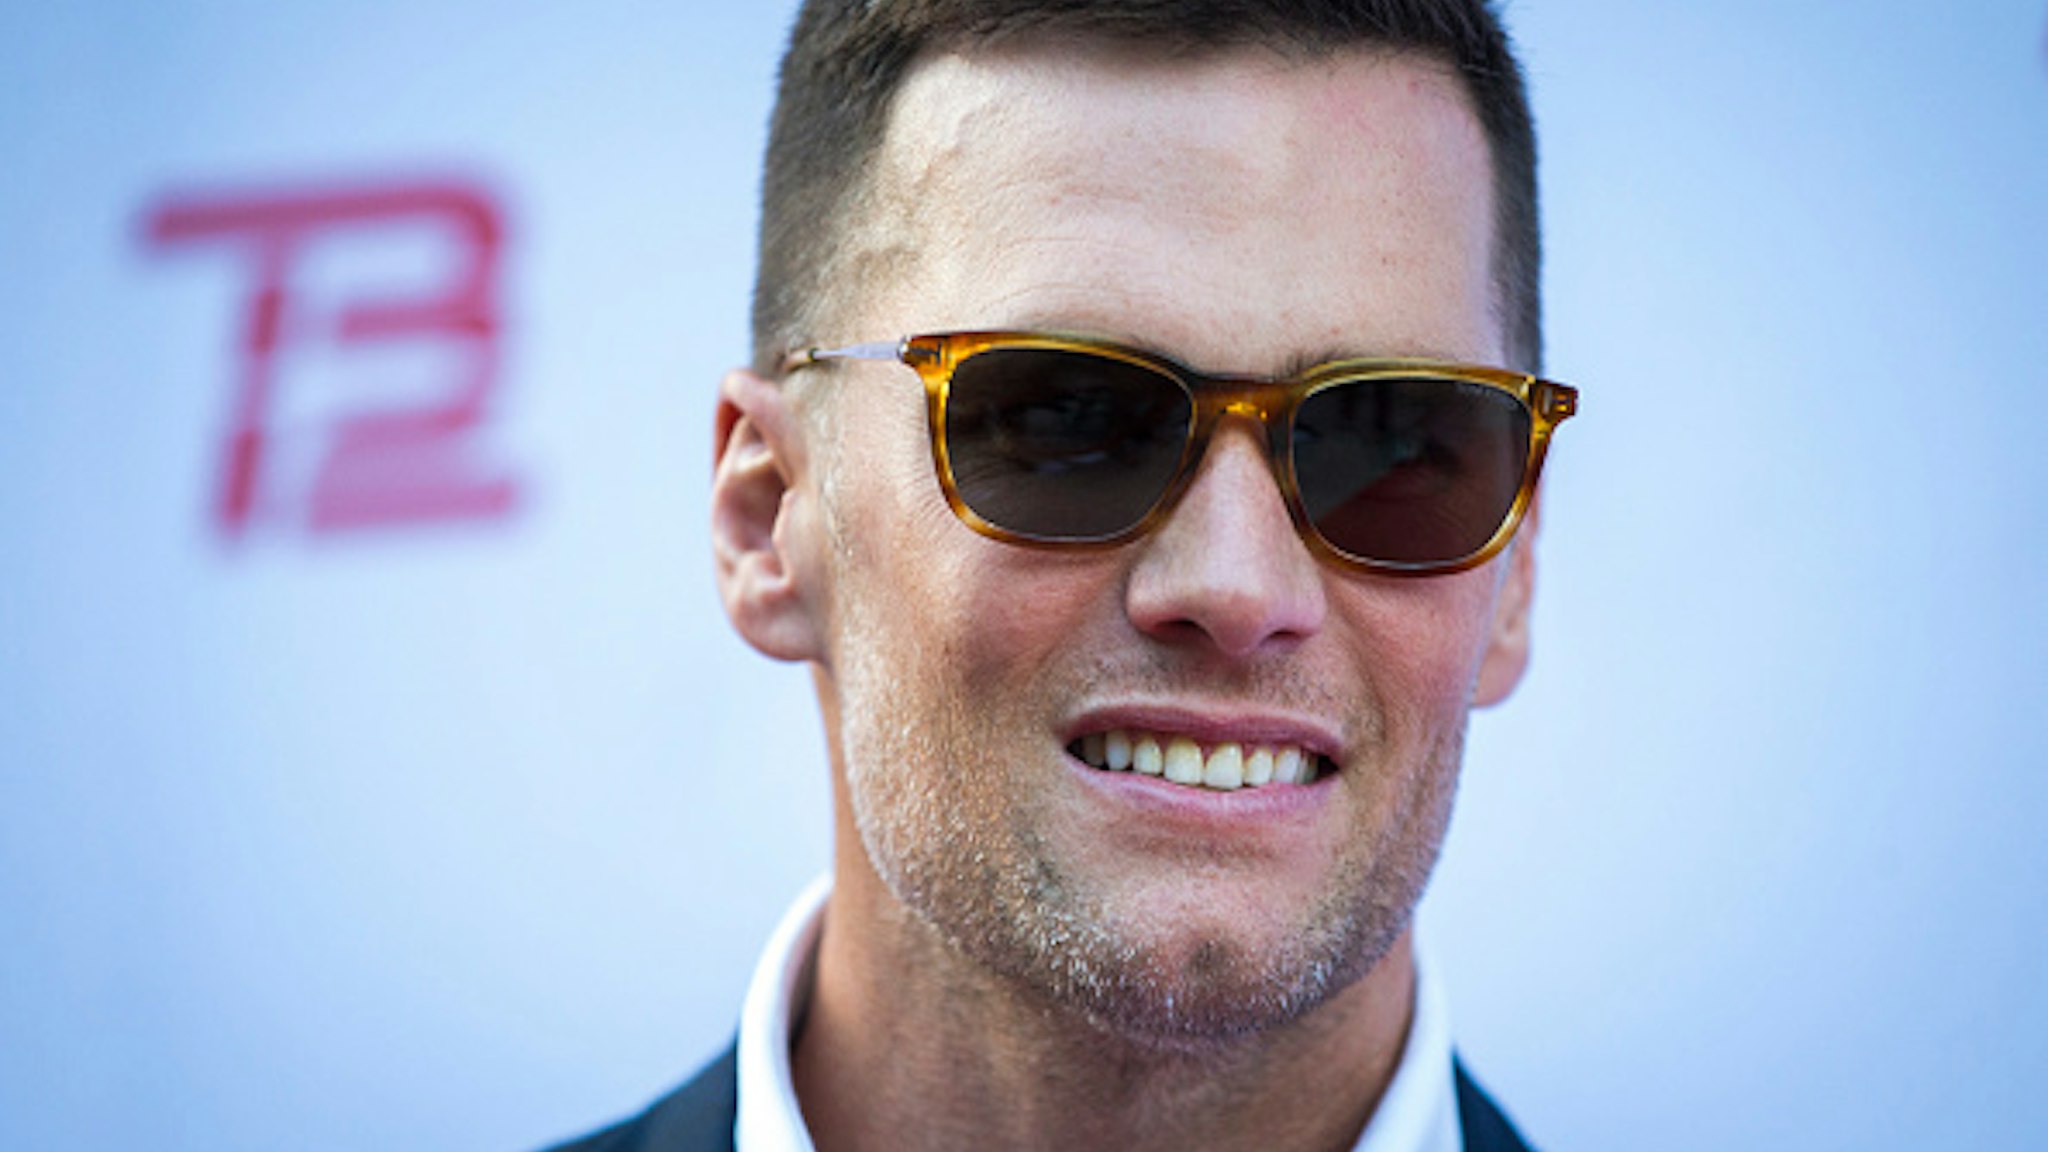 BOSTON, MA - SEPTEMBER 17: New England Patriots quarterback Tom Brady poses during the TB12 Grand Opening Event at the TB12 Performance &amp; Recovery Center in Boston on Sep. 17, 2019.